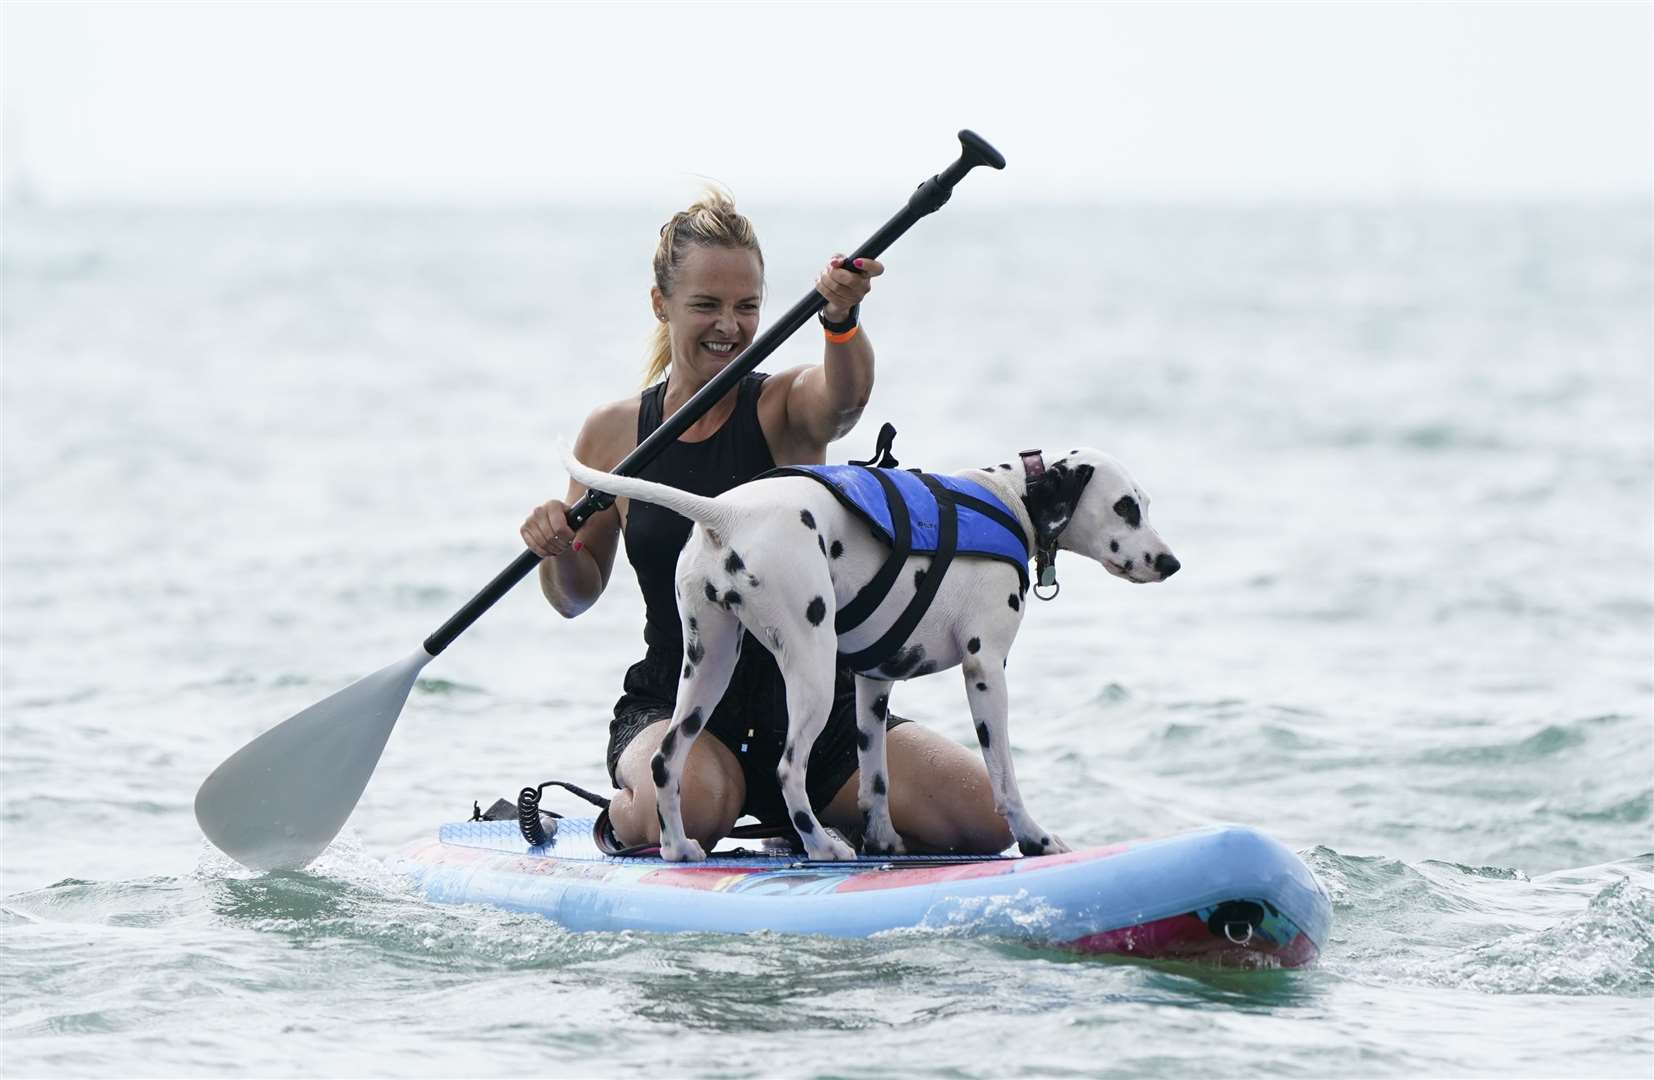 Marina White and her pet Coco took part in the Dog Masters 2022 UK Dog Surfing Championships at Branksome Dene Chine beach in Poole, Dorset (Andrew Matthews/PA)